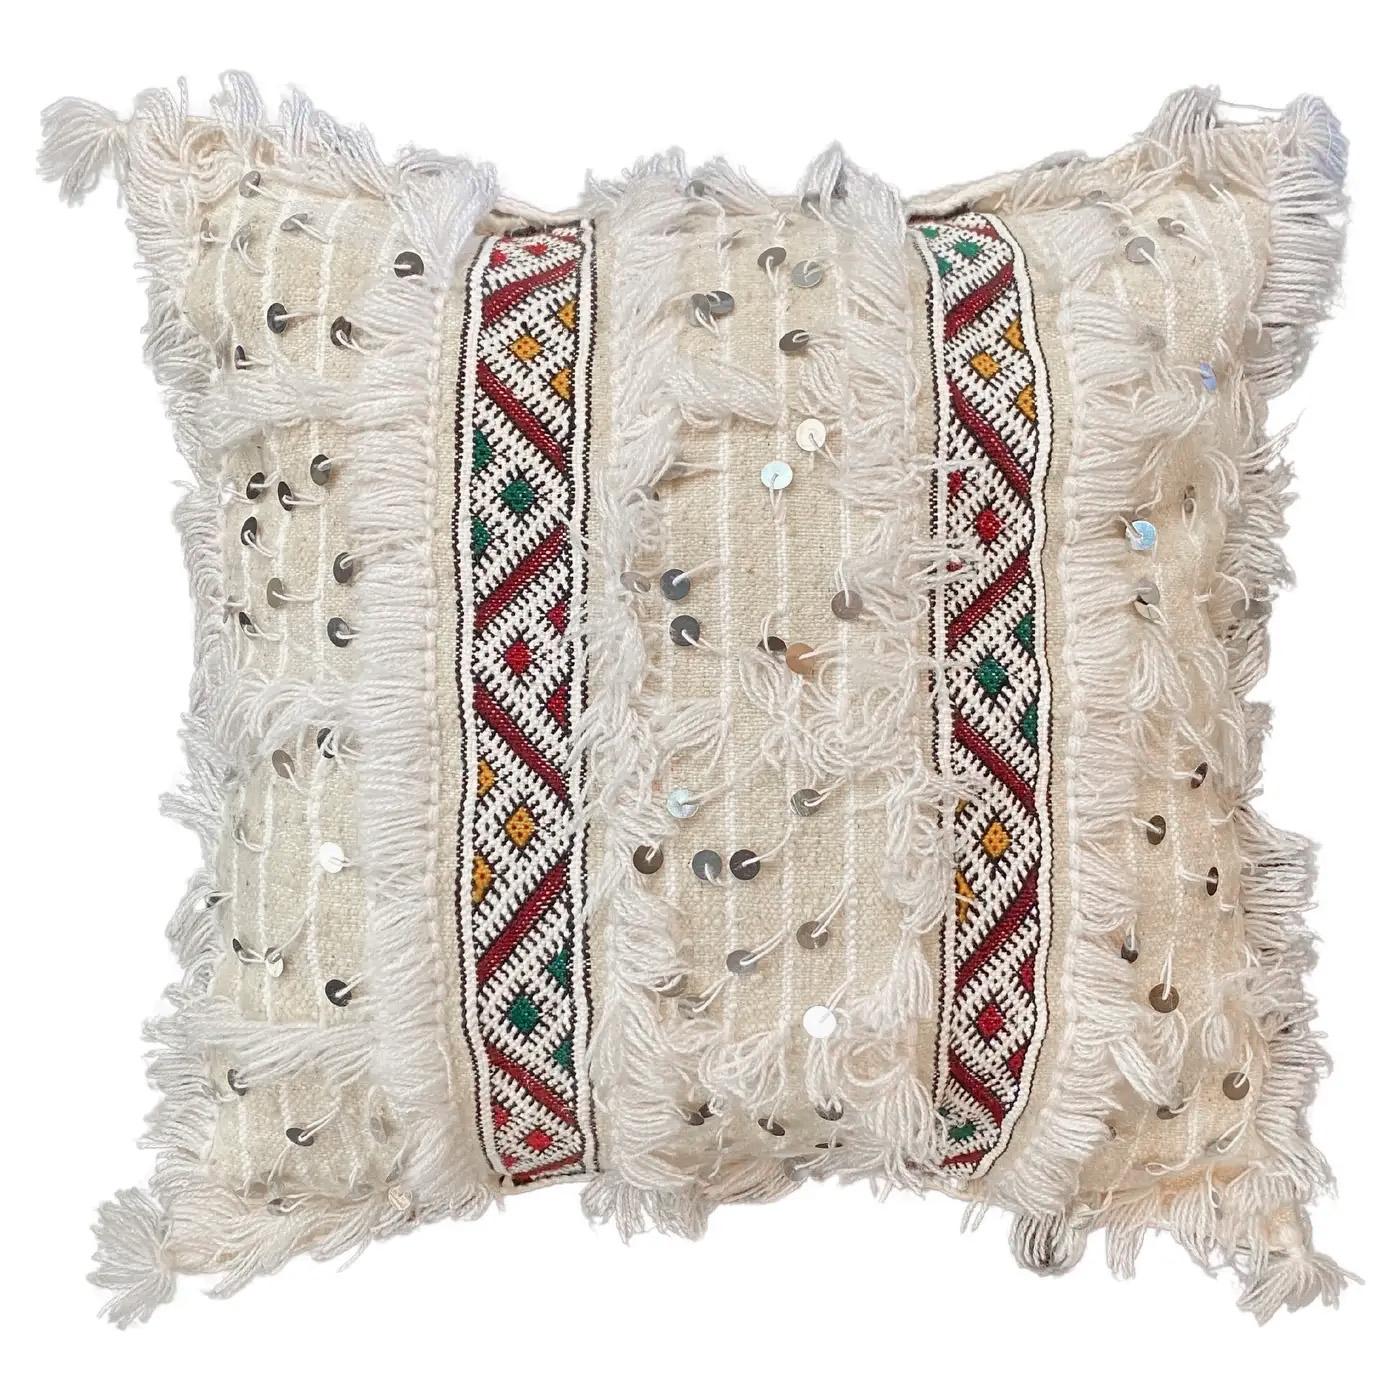 Handcrafted by Berber women in the Azilal region of Morocco, this pair of pillows is handmade with local organic wool and adhered with sequins for extra detail. Boasting unique color schemes and fringed edges, the Moroccan Wedding Pillows' intricate